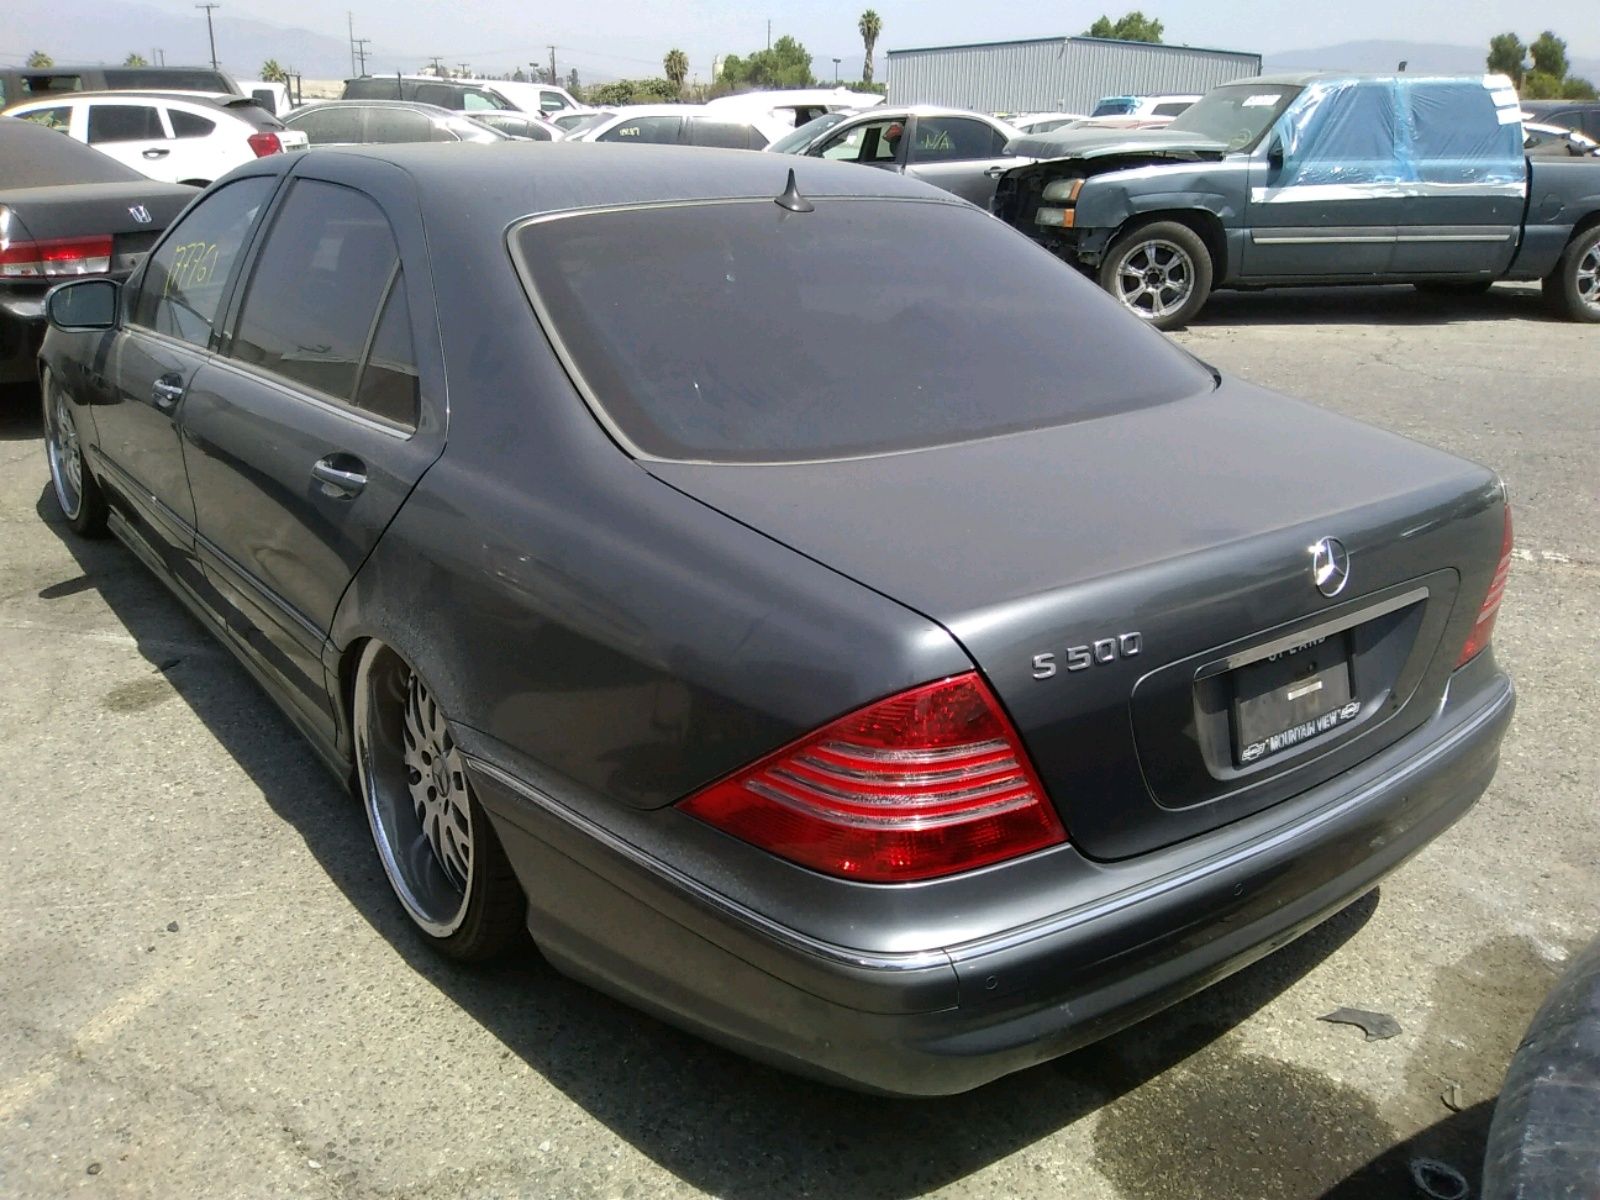 3 of WDBNG75J86A474811 Mercedes-Benz S-Class 2006